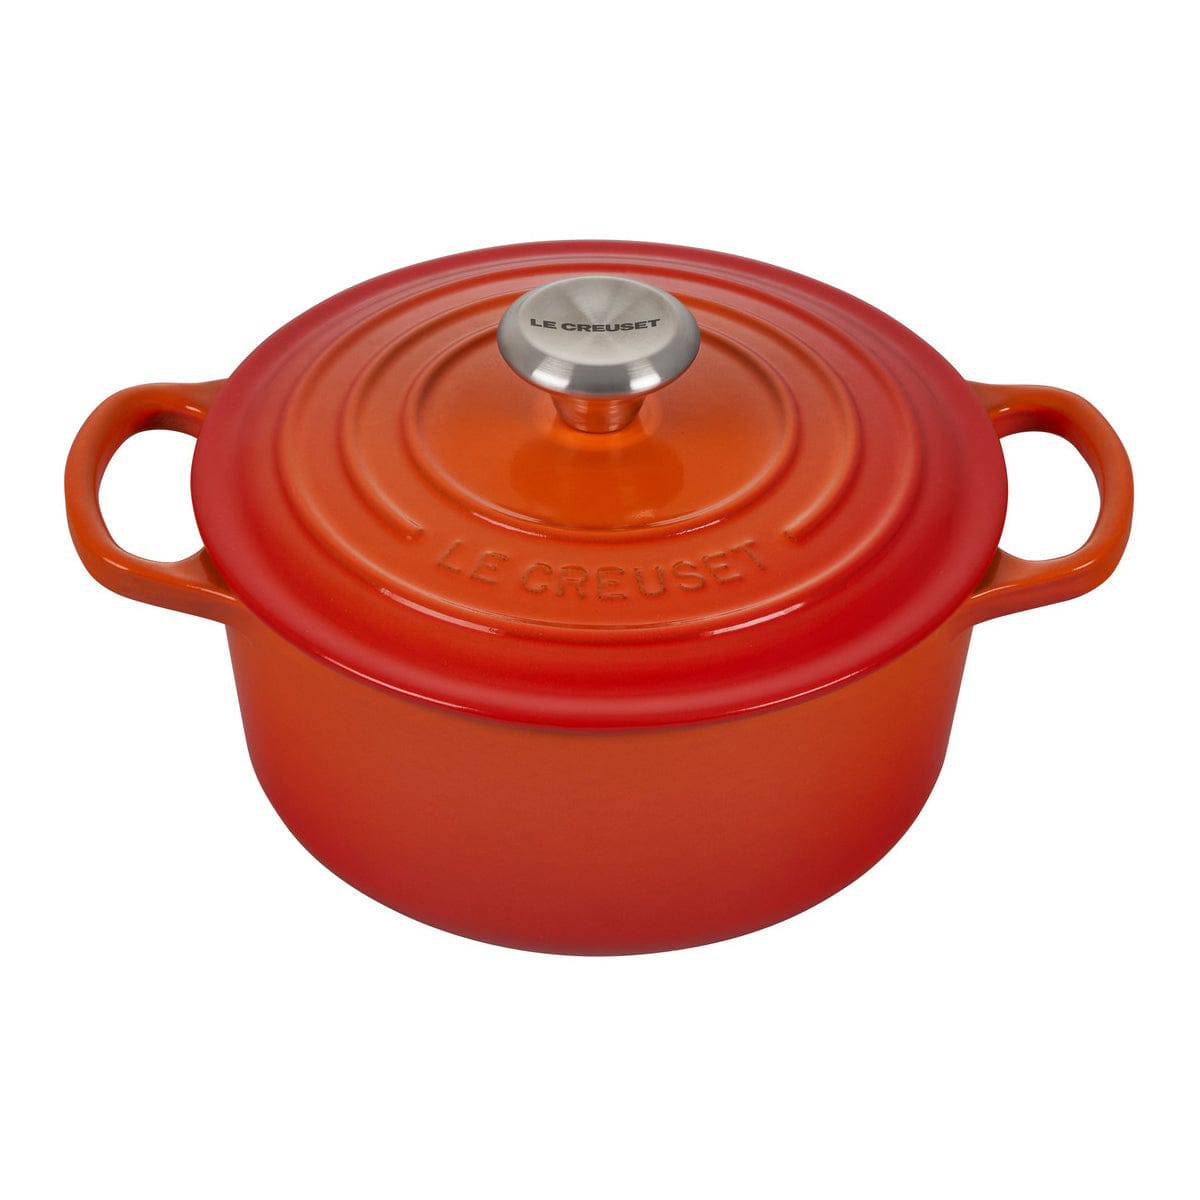 Le Creuset Signature Enameled Cast Iron French / Round Dutch Oven With Lid, 2-Quart, Flame - Kitchen Universe